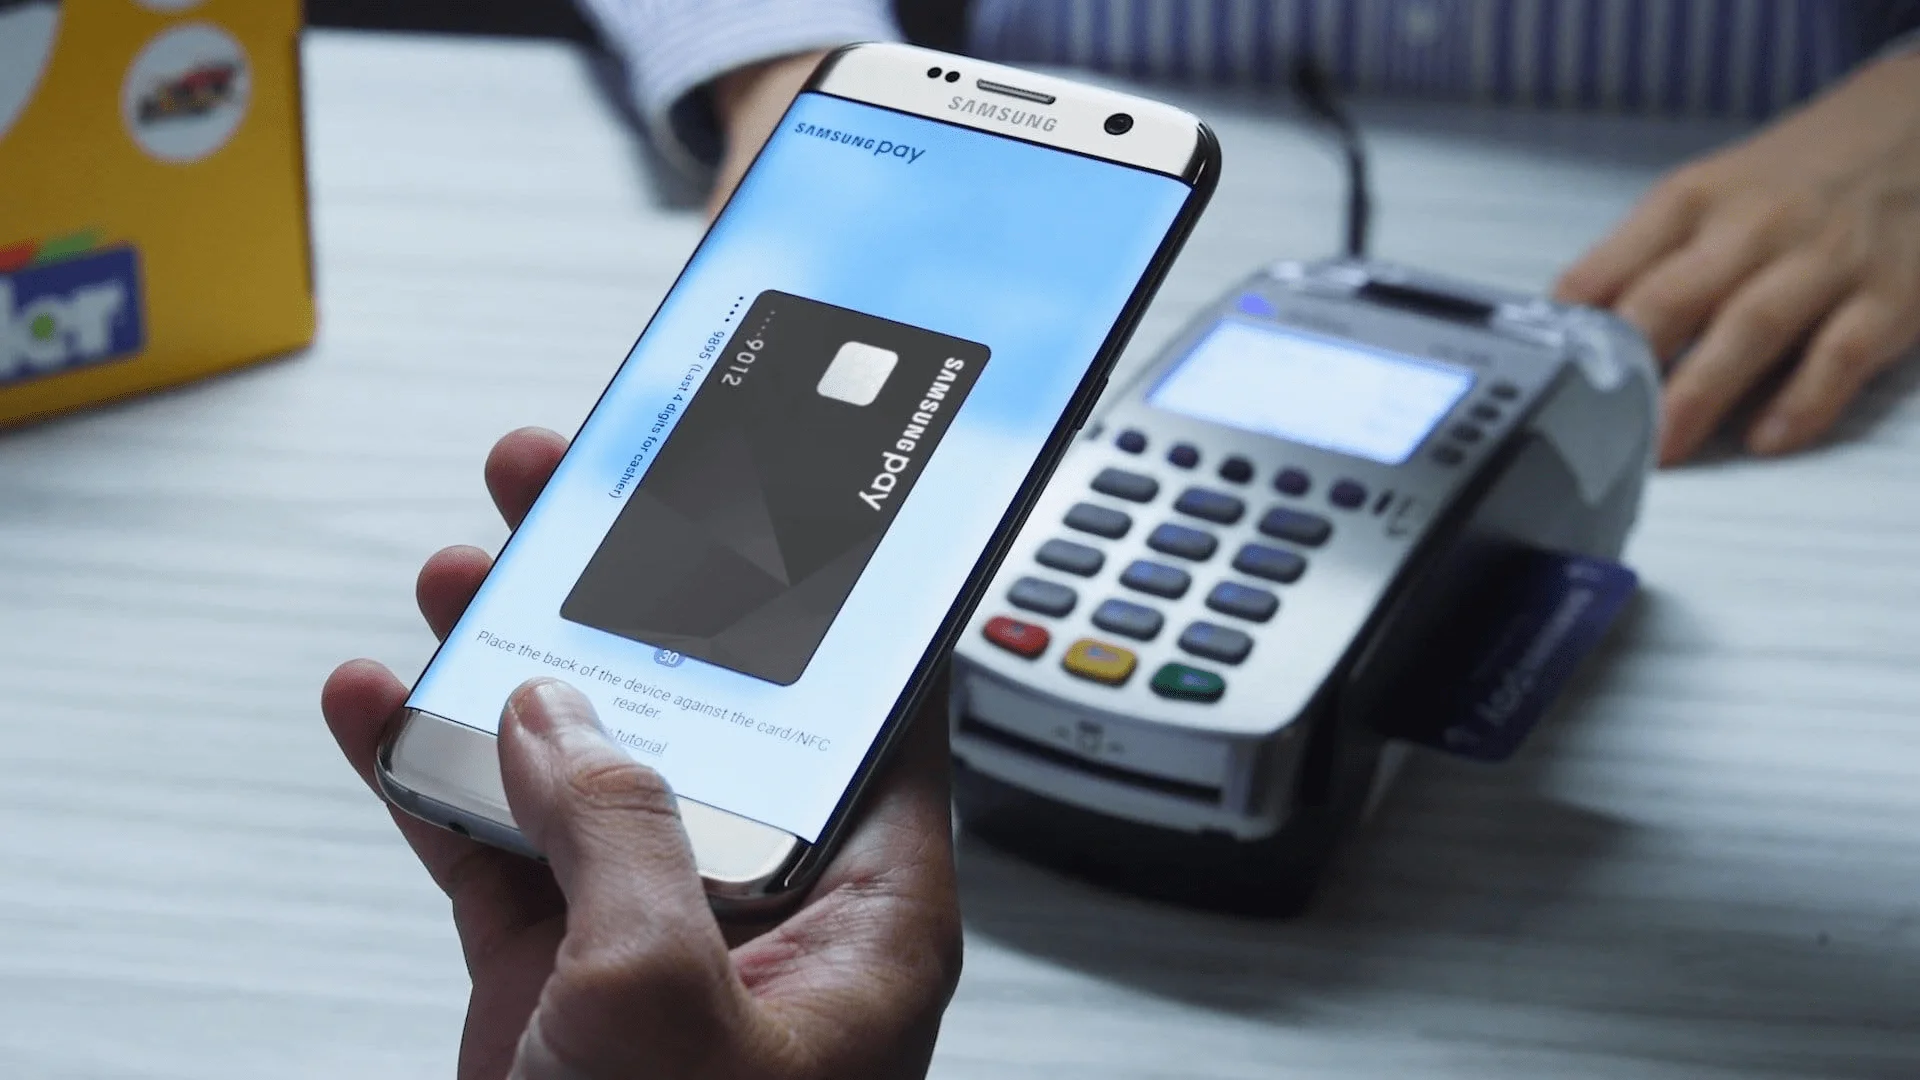 IT specialists tested the security of the Samsung Pay mobile client